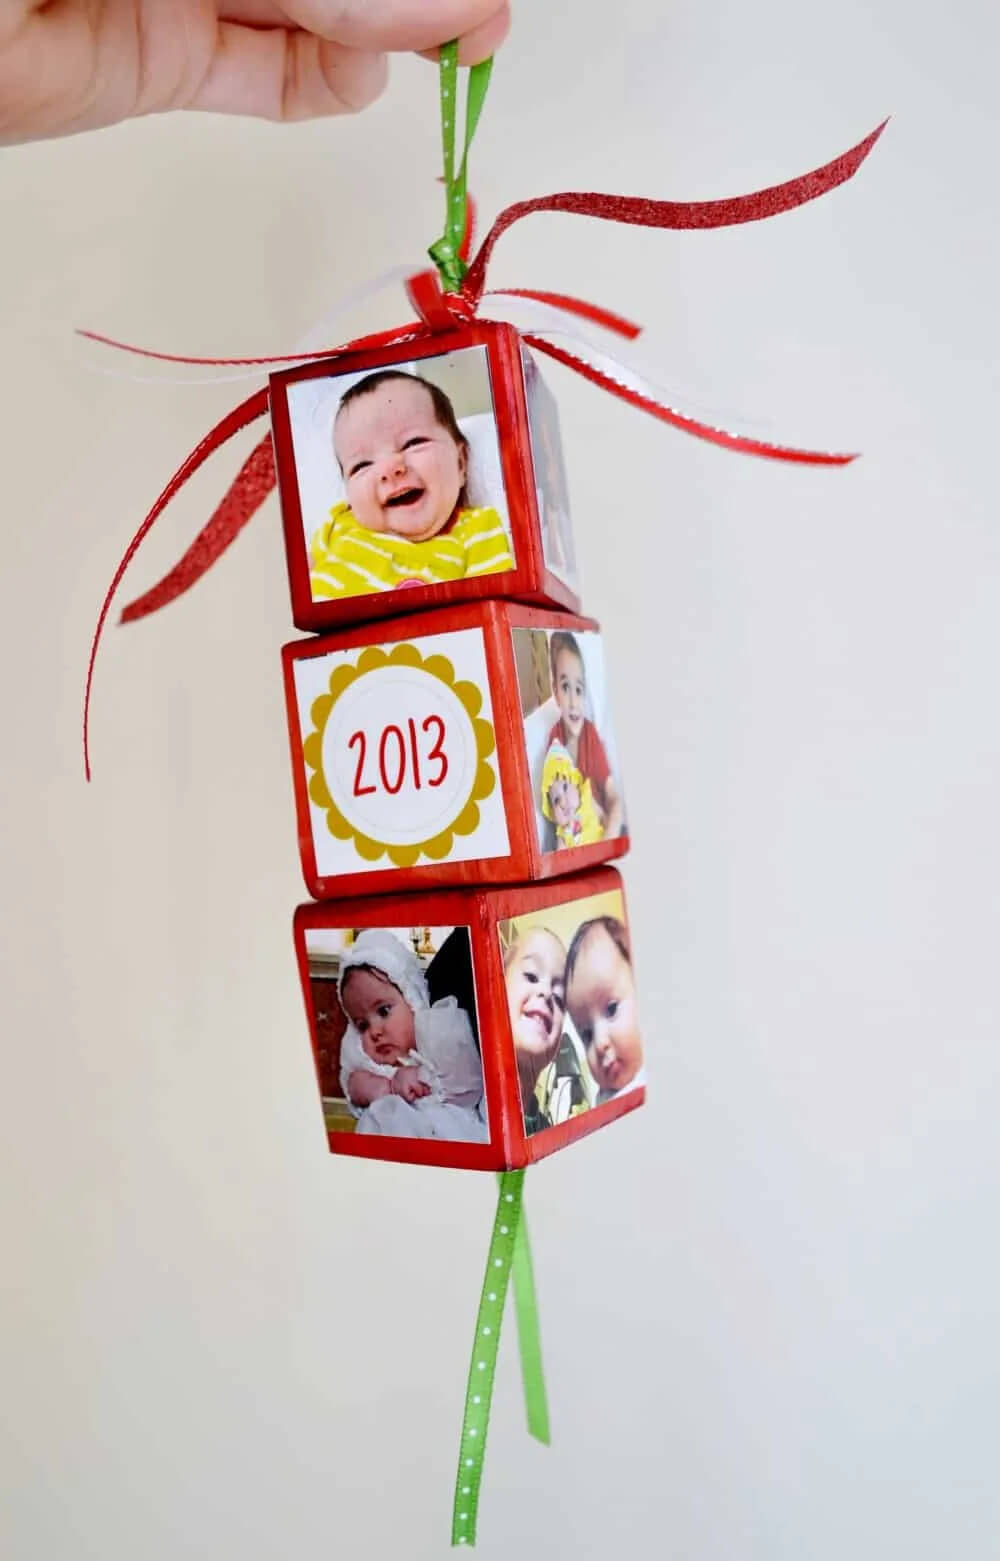 Personalized Photo Ornaments Craft Made With Mod Podge DIY Christmas Ornaments Crafts With Photos